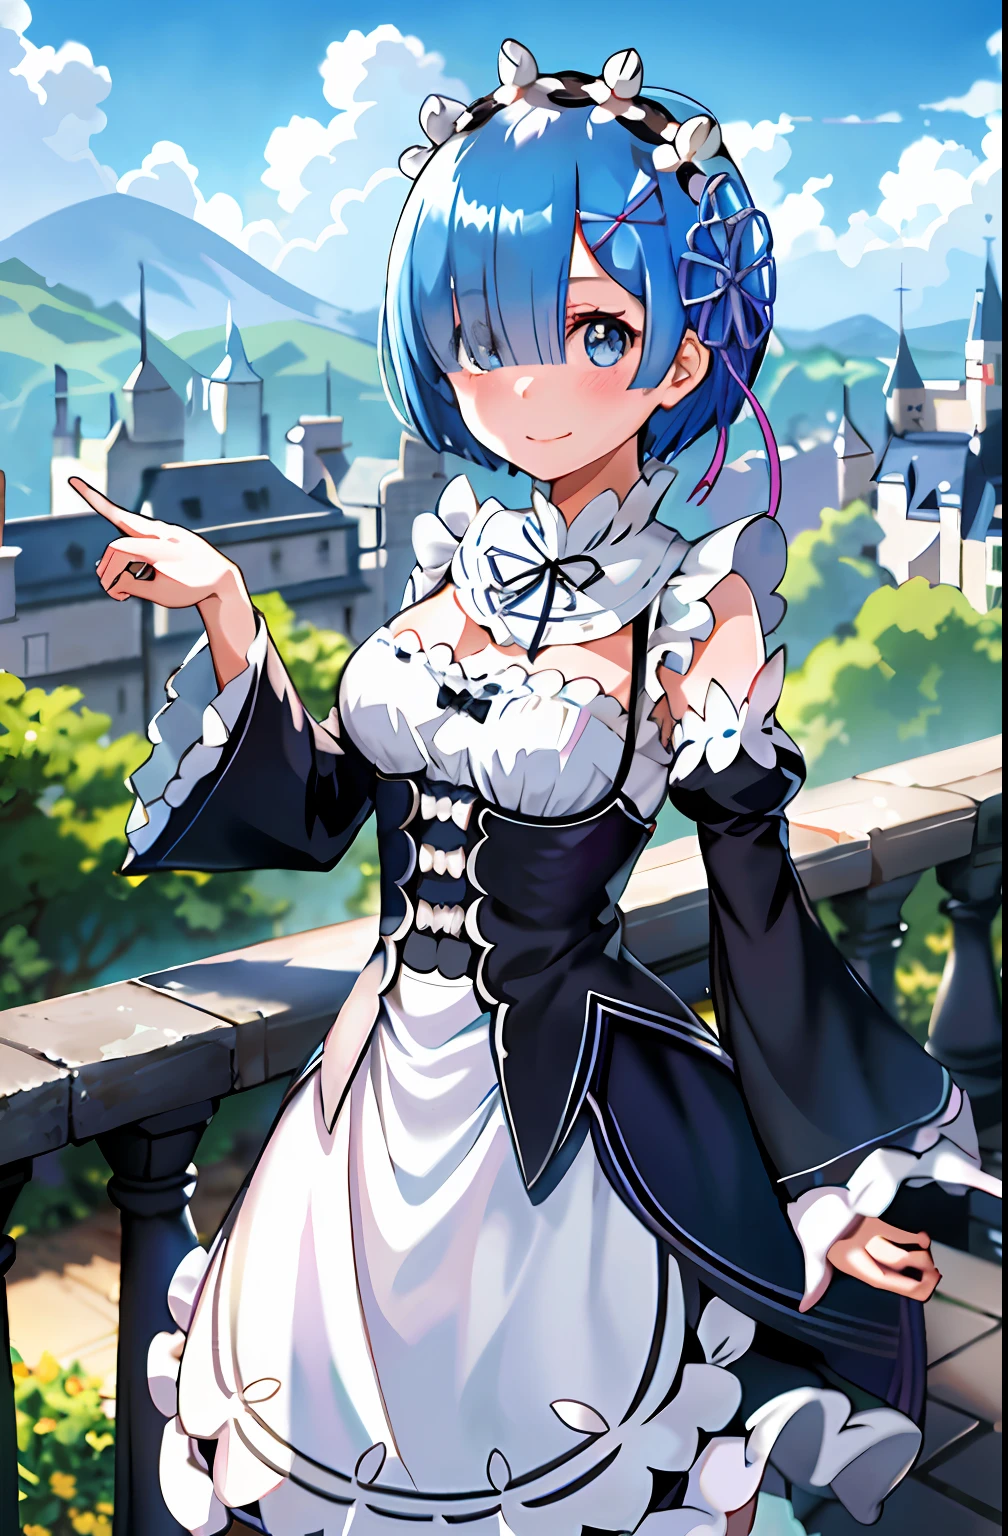 "blue hair, Rem (Re:Zero), [smiling], blushing, castle scenery, masterpiece, best image quality, optimal lighting, a single girl wearing a skirt, with medium-sized breasts, shy expression